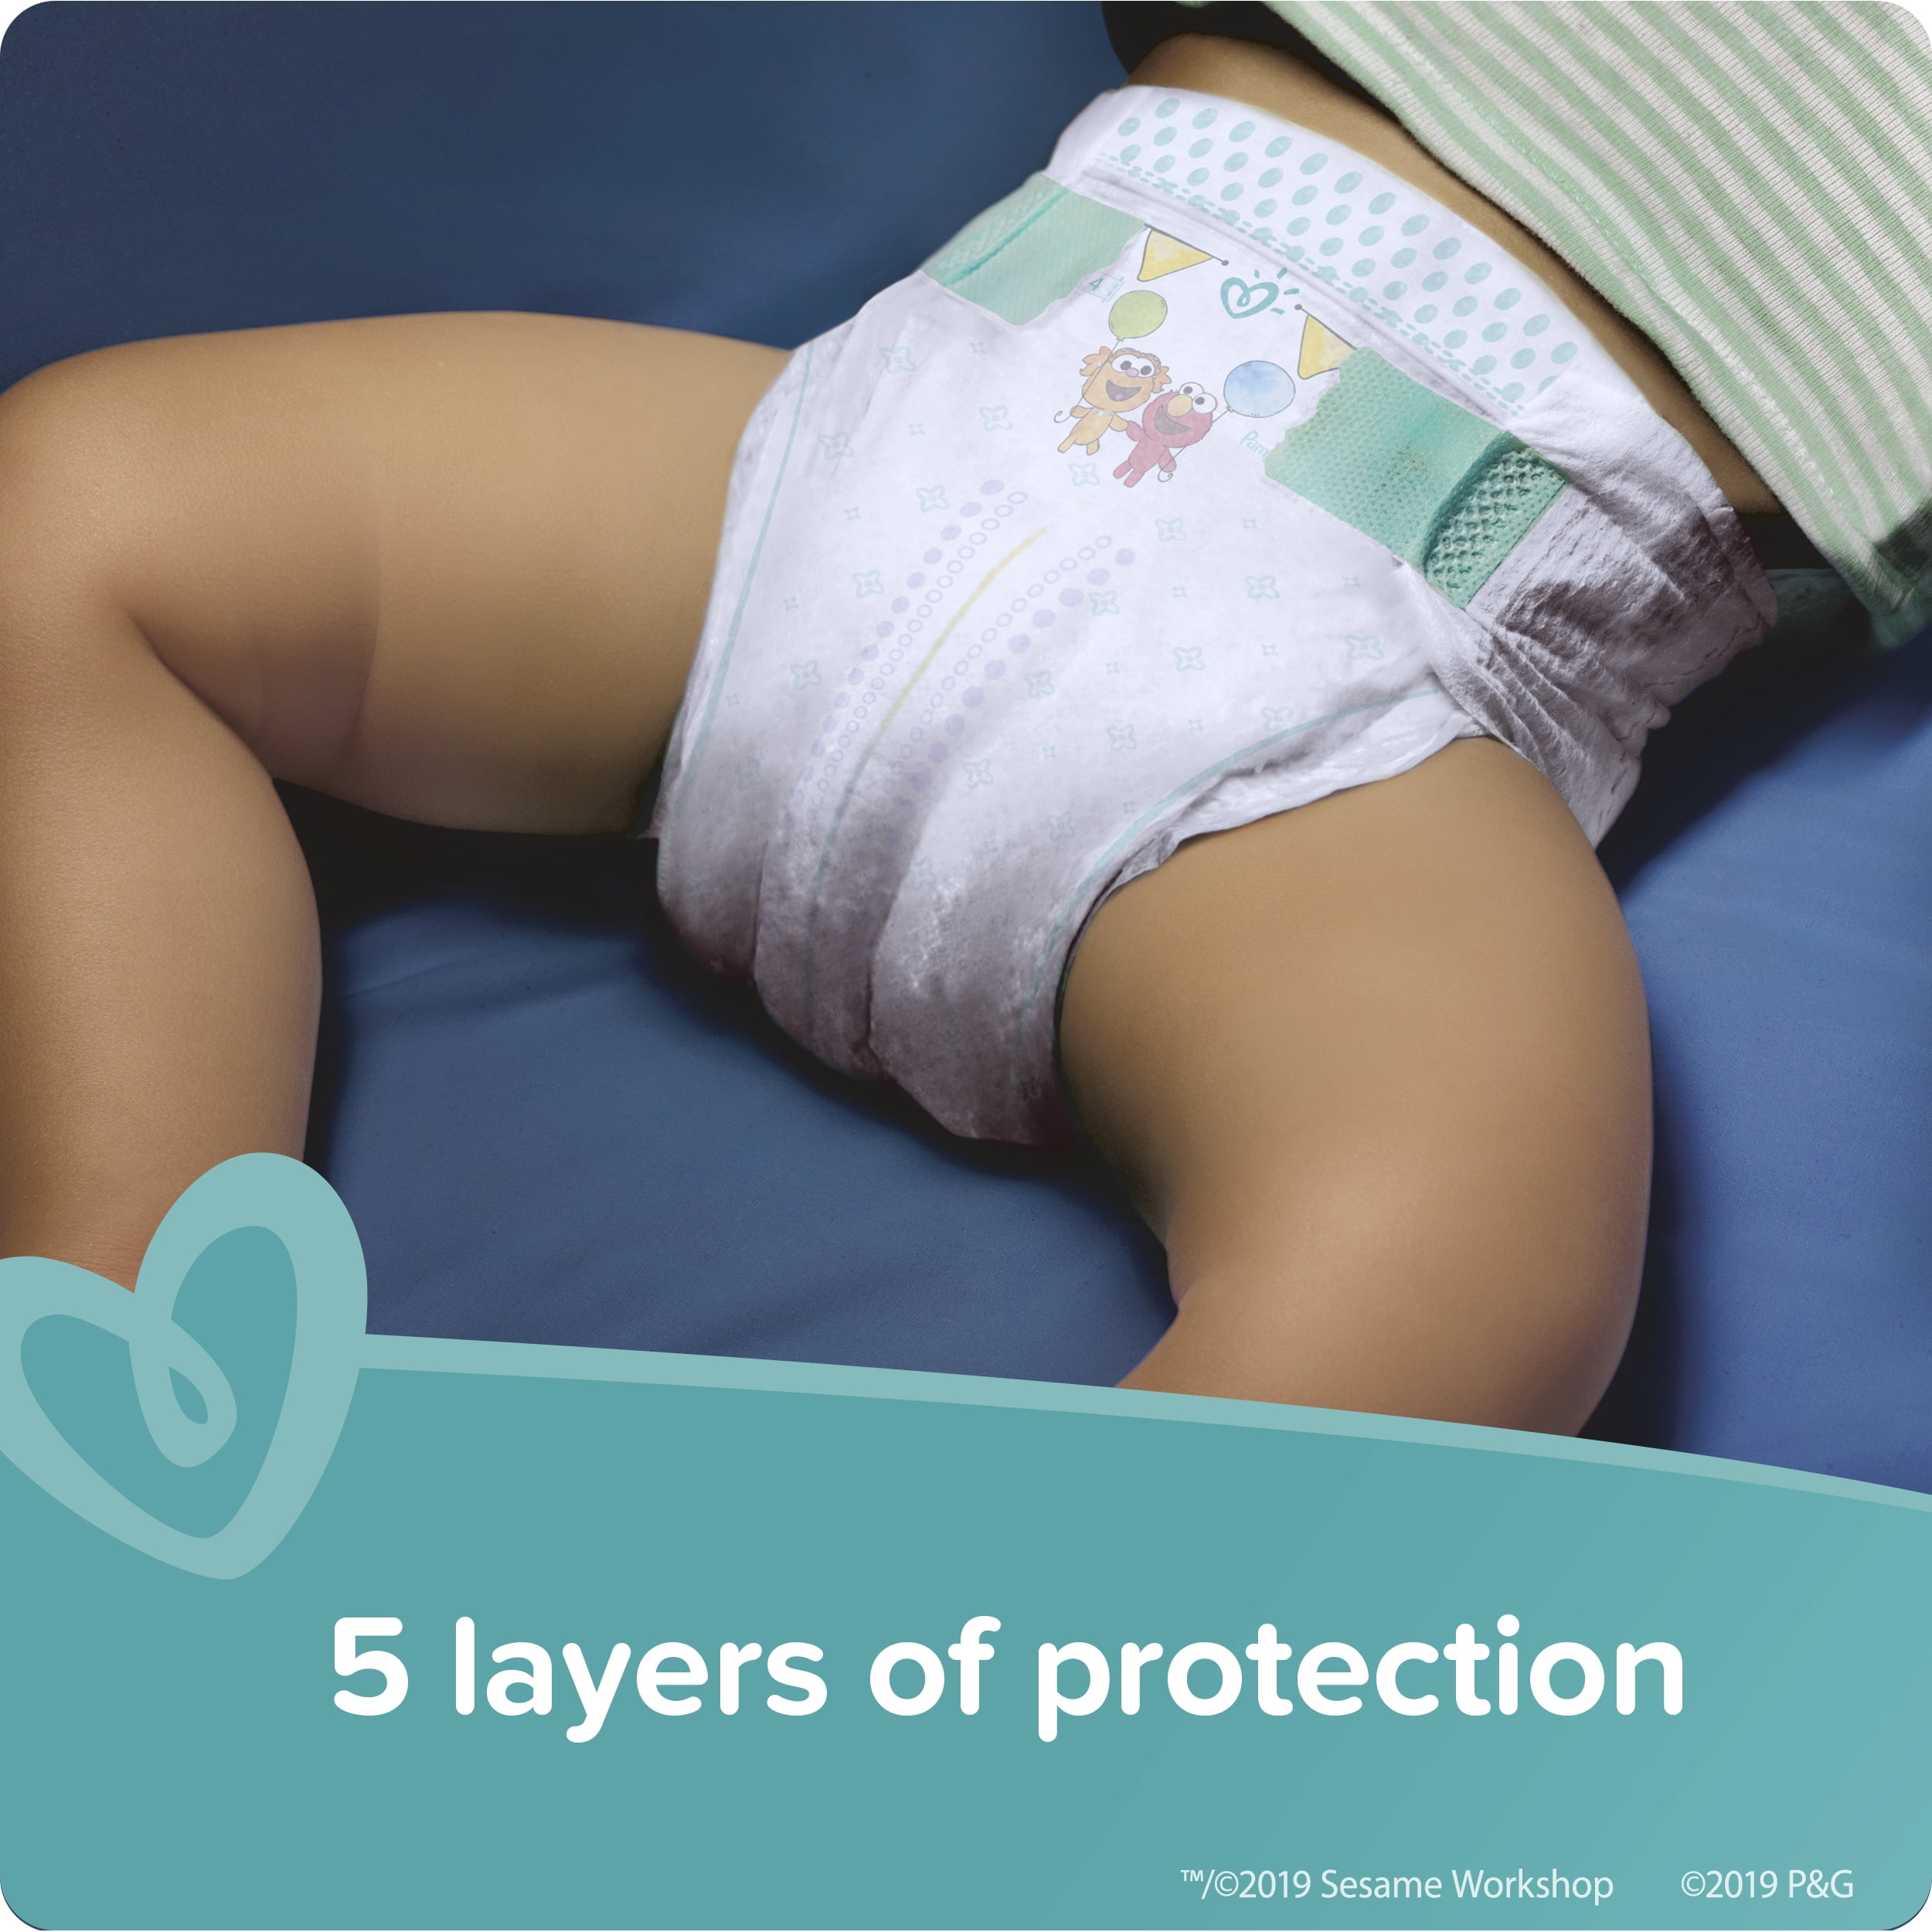 Pampers Baby-Dry - Pañales desechables absorbentes, talla 4, 150 unidades